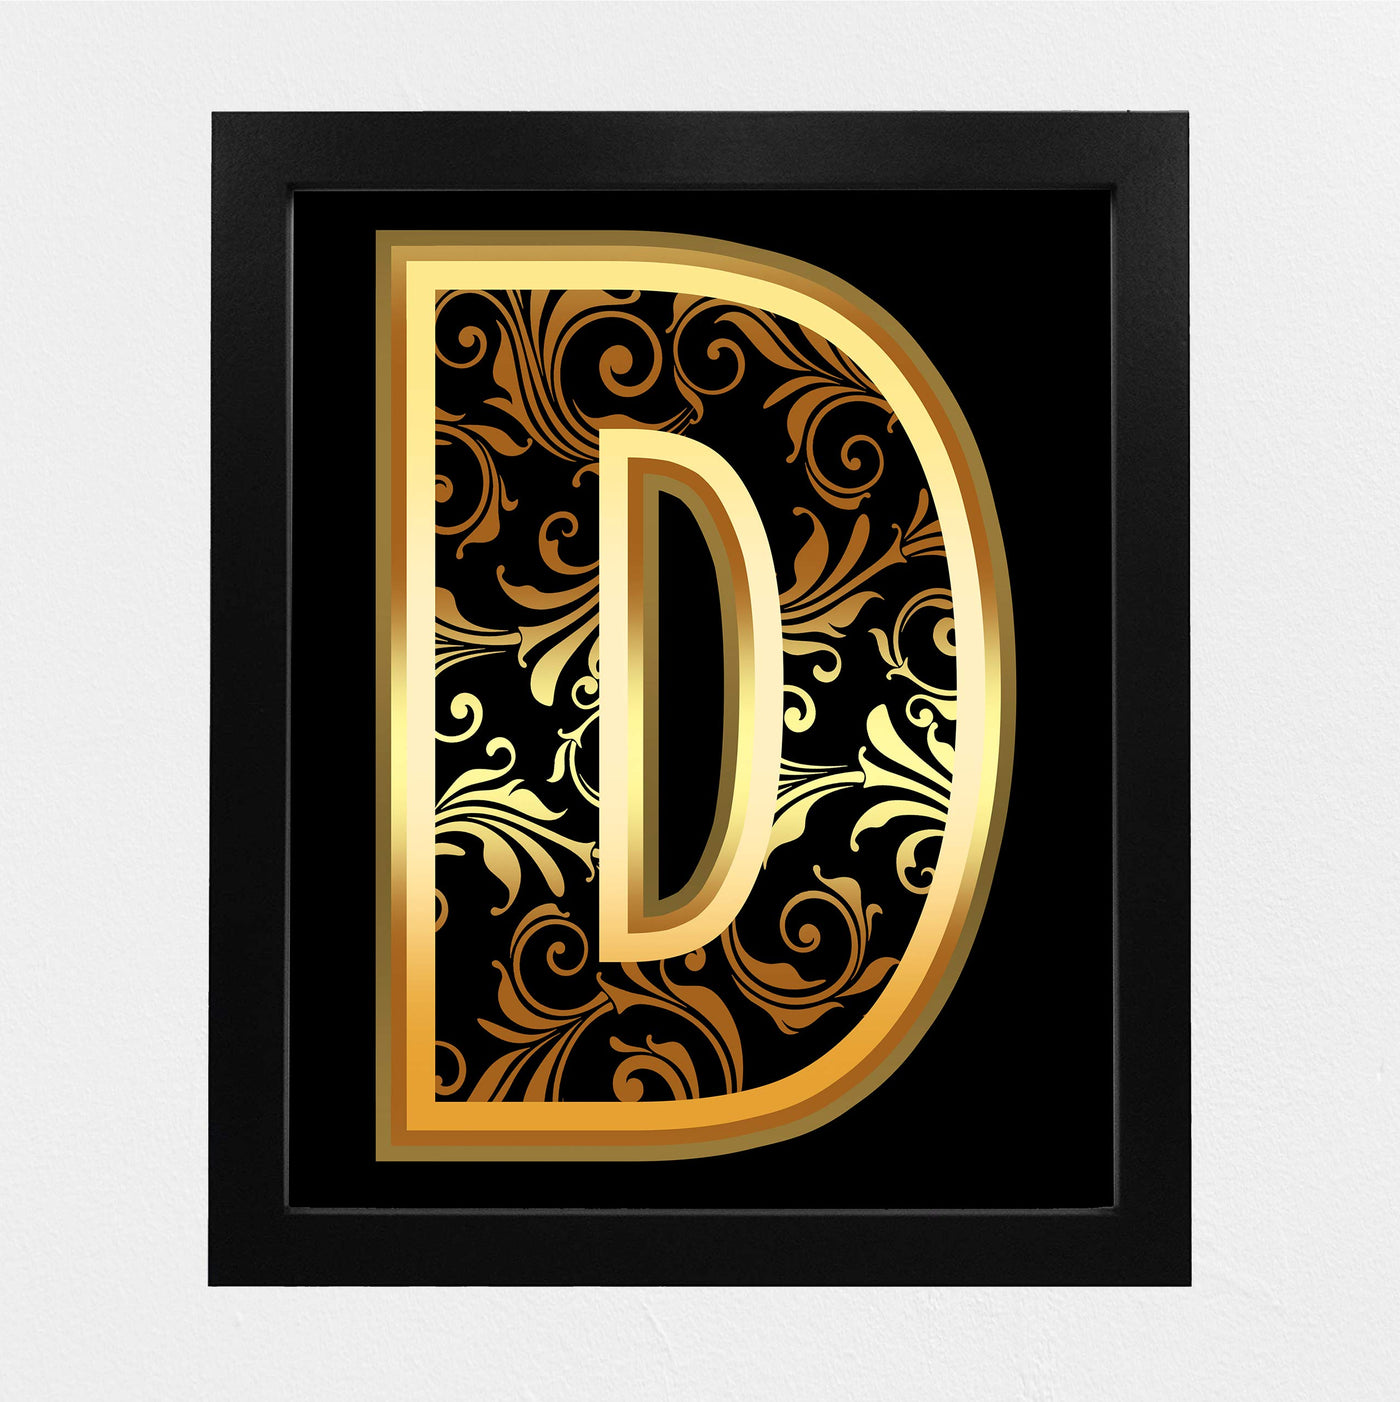 Decorative Letter 'D' Wall Decor- 8x10" Alphabet Letters Wall Art Print-Ready to Frame. Home-Office-Farmhouse-Nursery Decor. Perfect Welcome-Entryway Sign! Personalize Your Space, Makes a Great Gift!